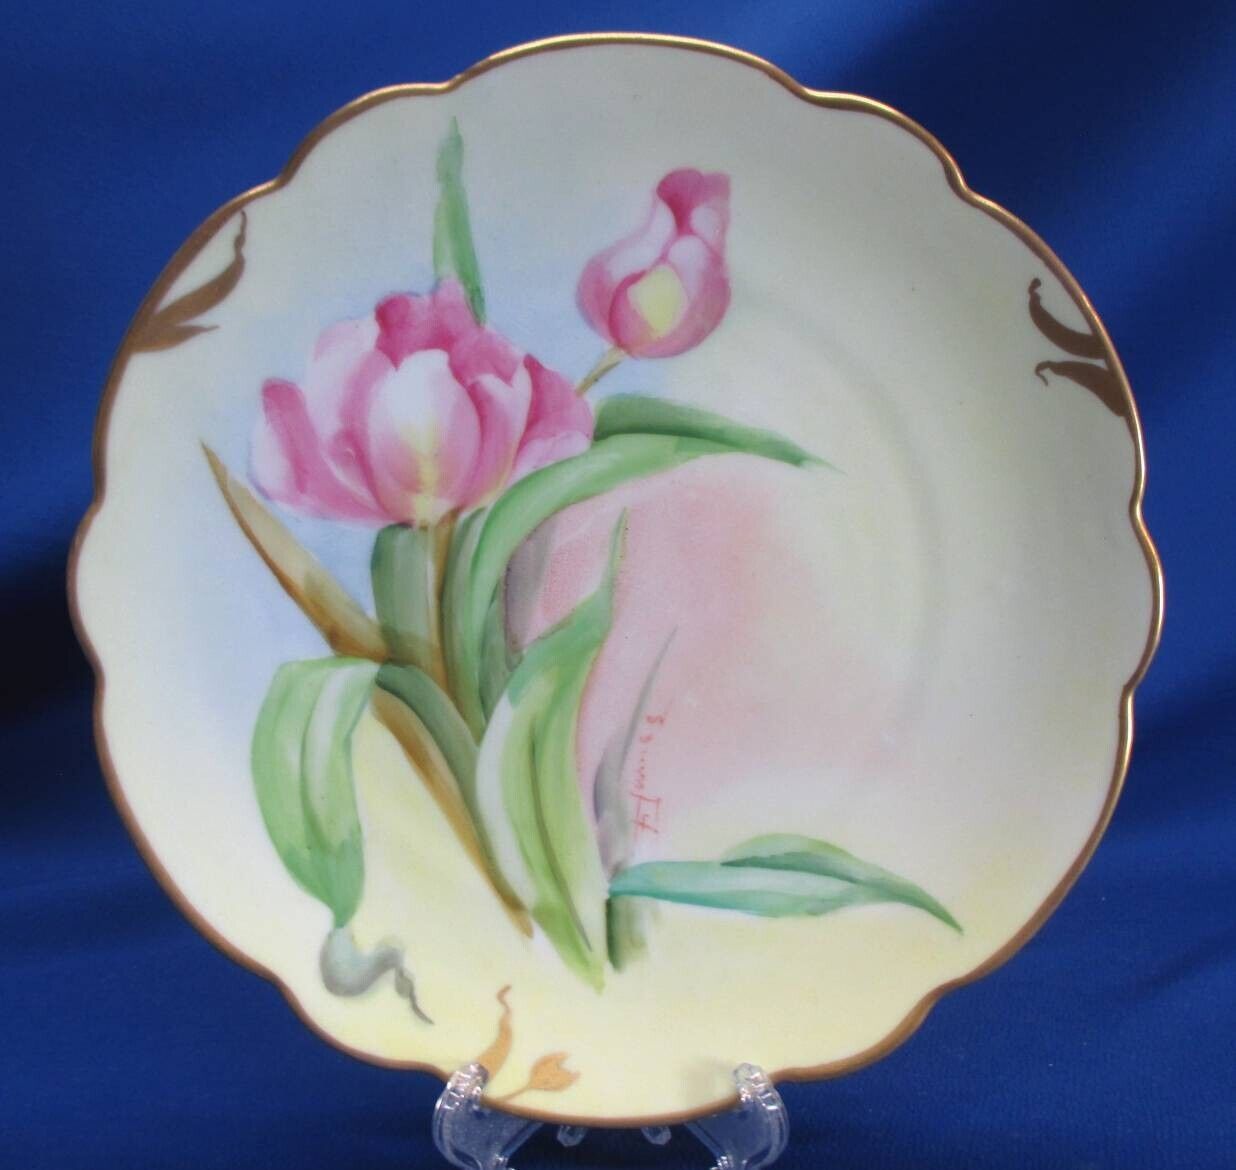 PICKARD HAND-PAINTED PINK TULIPS ARTIST SIGNED PLATE